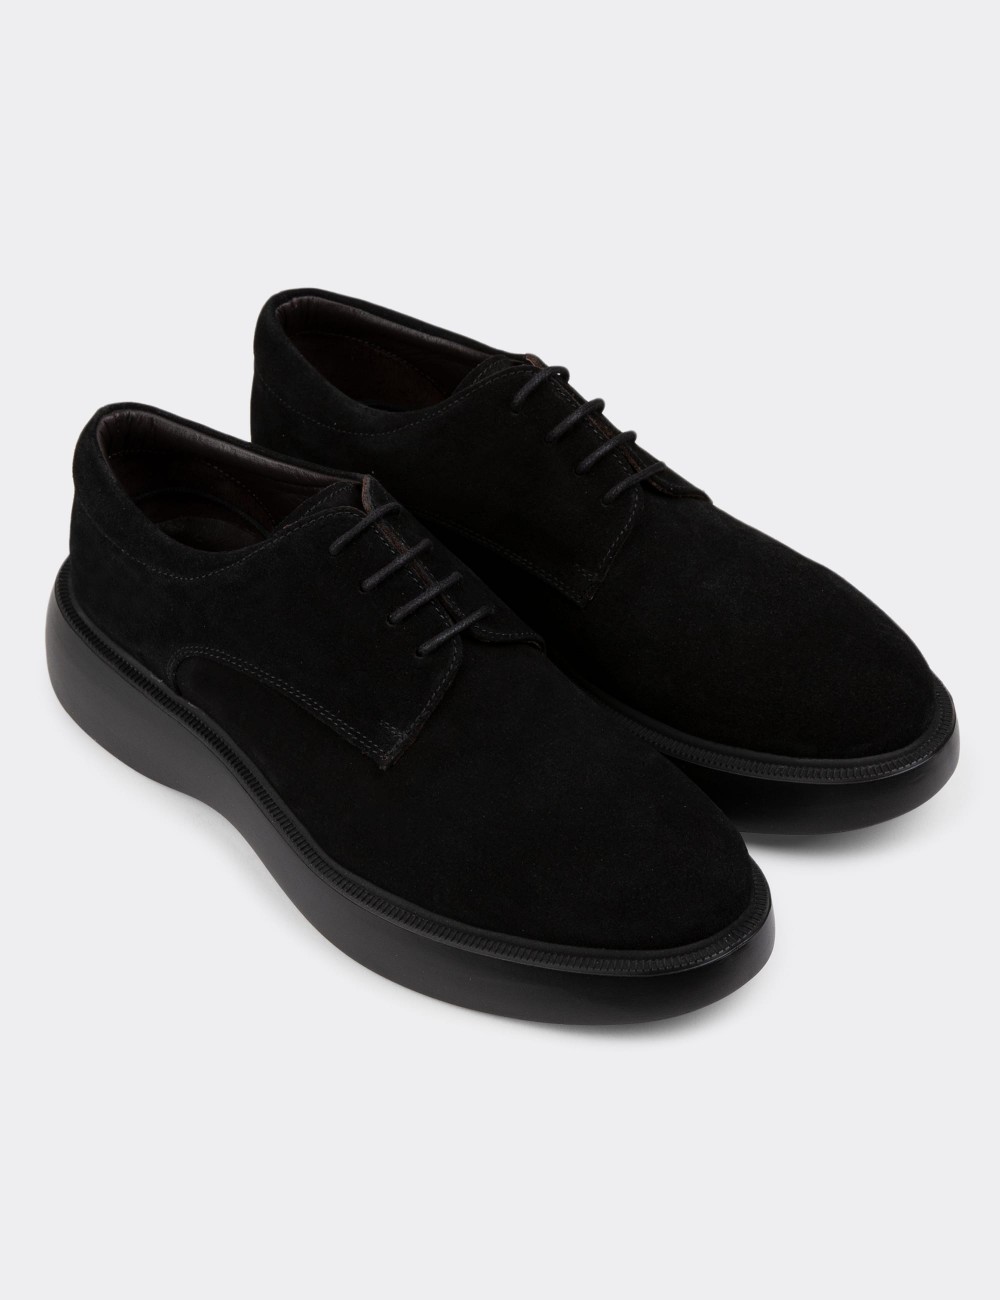 Black Suede Leather Lace-up Shoes - 01934MSYHE01